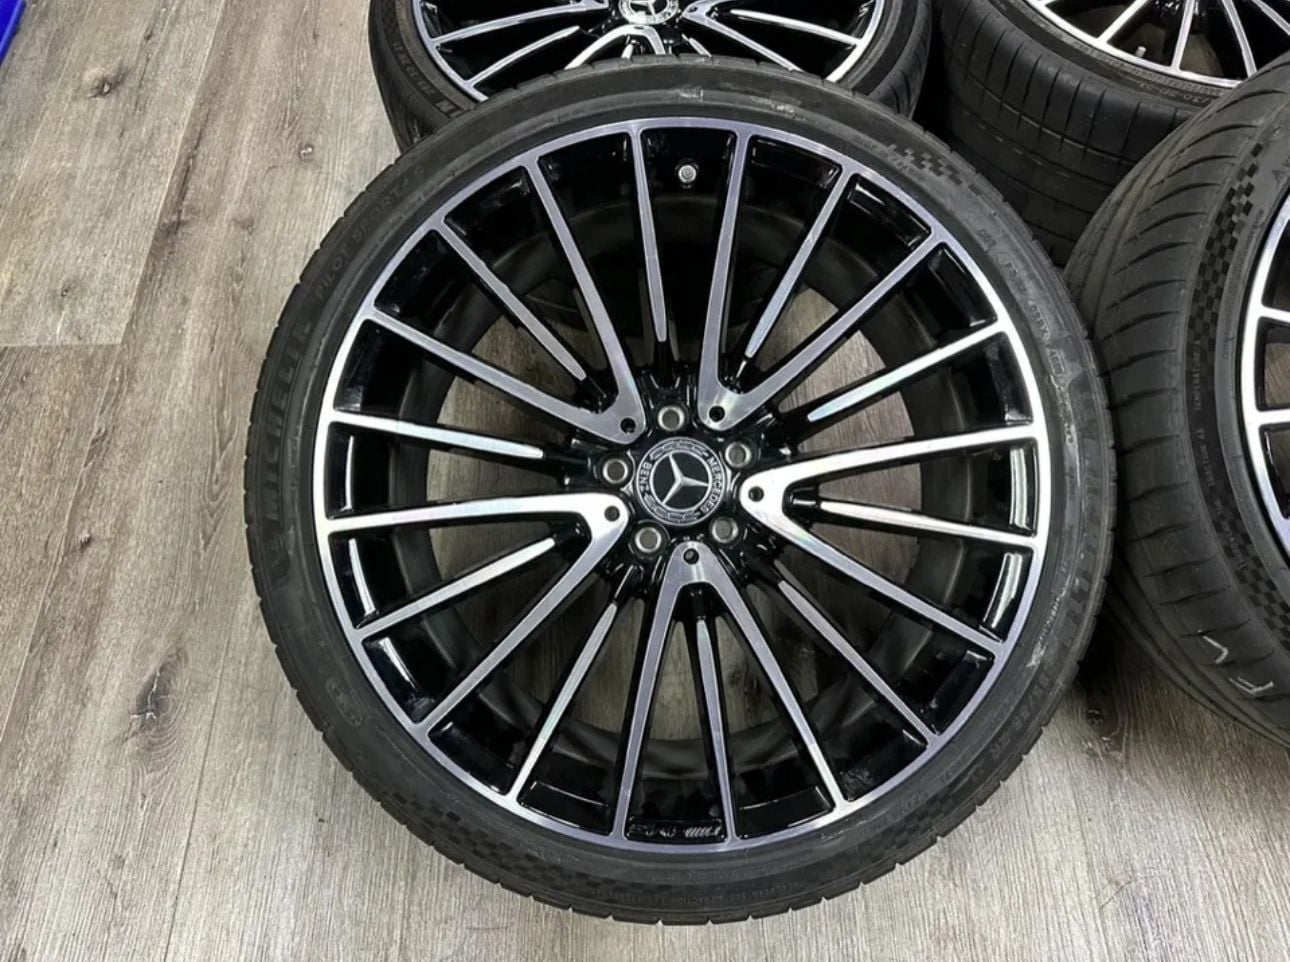 Wheels and Tires/Axles - Want to Buy - 21” Mercedes S Class Wheels - New or Used - 2021 to 2024 Mercedes-Benz S-Class - Atlanta, GA 30097, United States